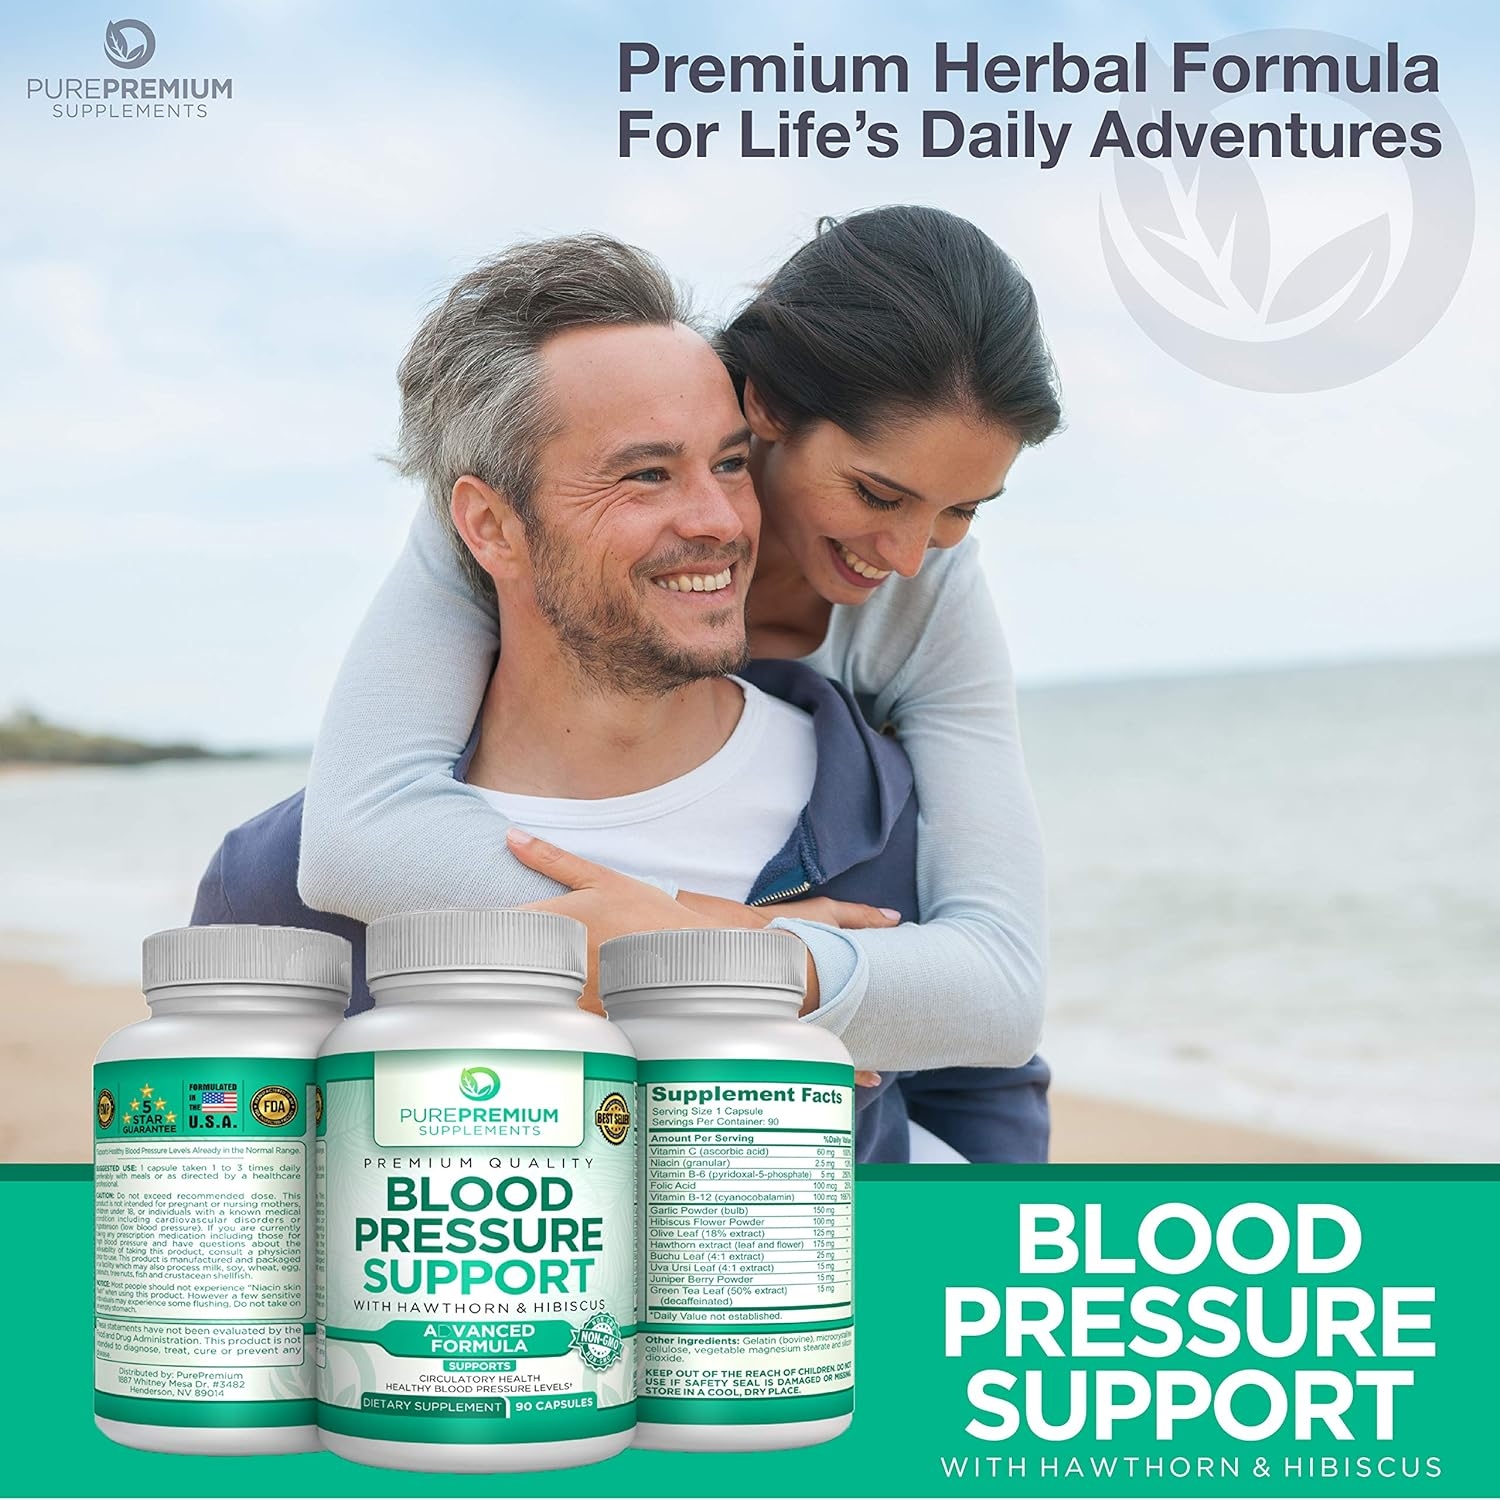 Premium Blood Pressure Support Supplement by PurePremium with Hawthorn, Hibiscus & Garlic - Supports Cardiovascular & Circulatory Health - Vitamins & Herbs Promote Heart Health - 90 Caps